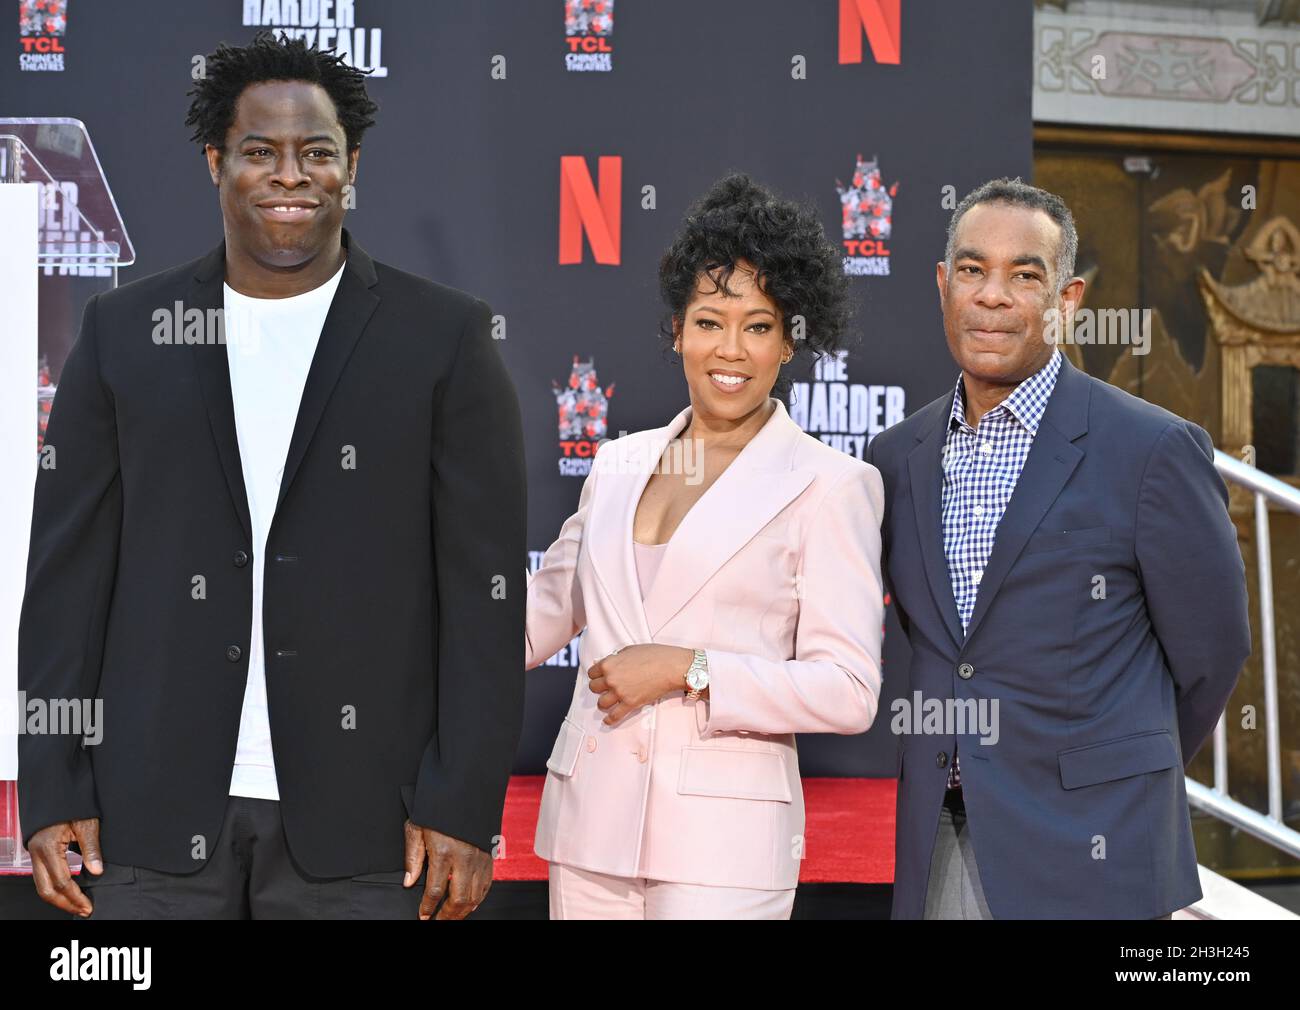 Los Angeles, USA. 28th Oct, 2021. LOS ANGELES, USA. October 28, 2021: Jeymes Samuel, Regina King & James Lassiter at the hand & footprint ceremony honoring actress Regina King, at the TCL Chinese Theatre, Hollywood. Picture Credit: Paul Smith/Alamy Live News Stock Photo